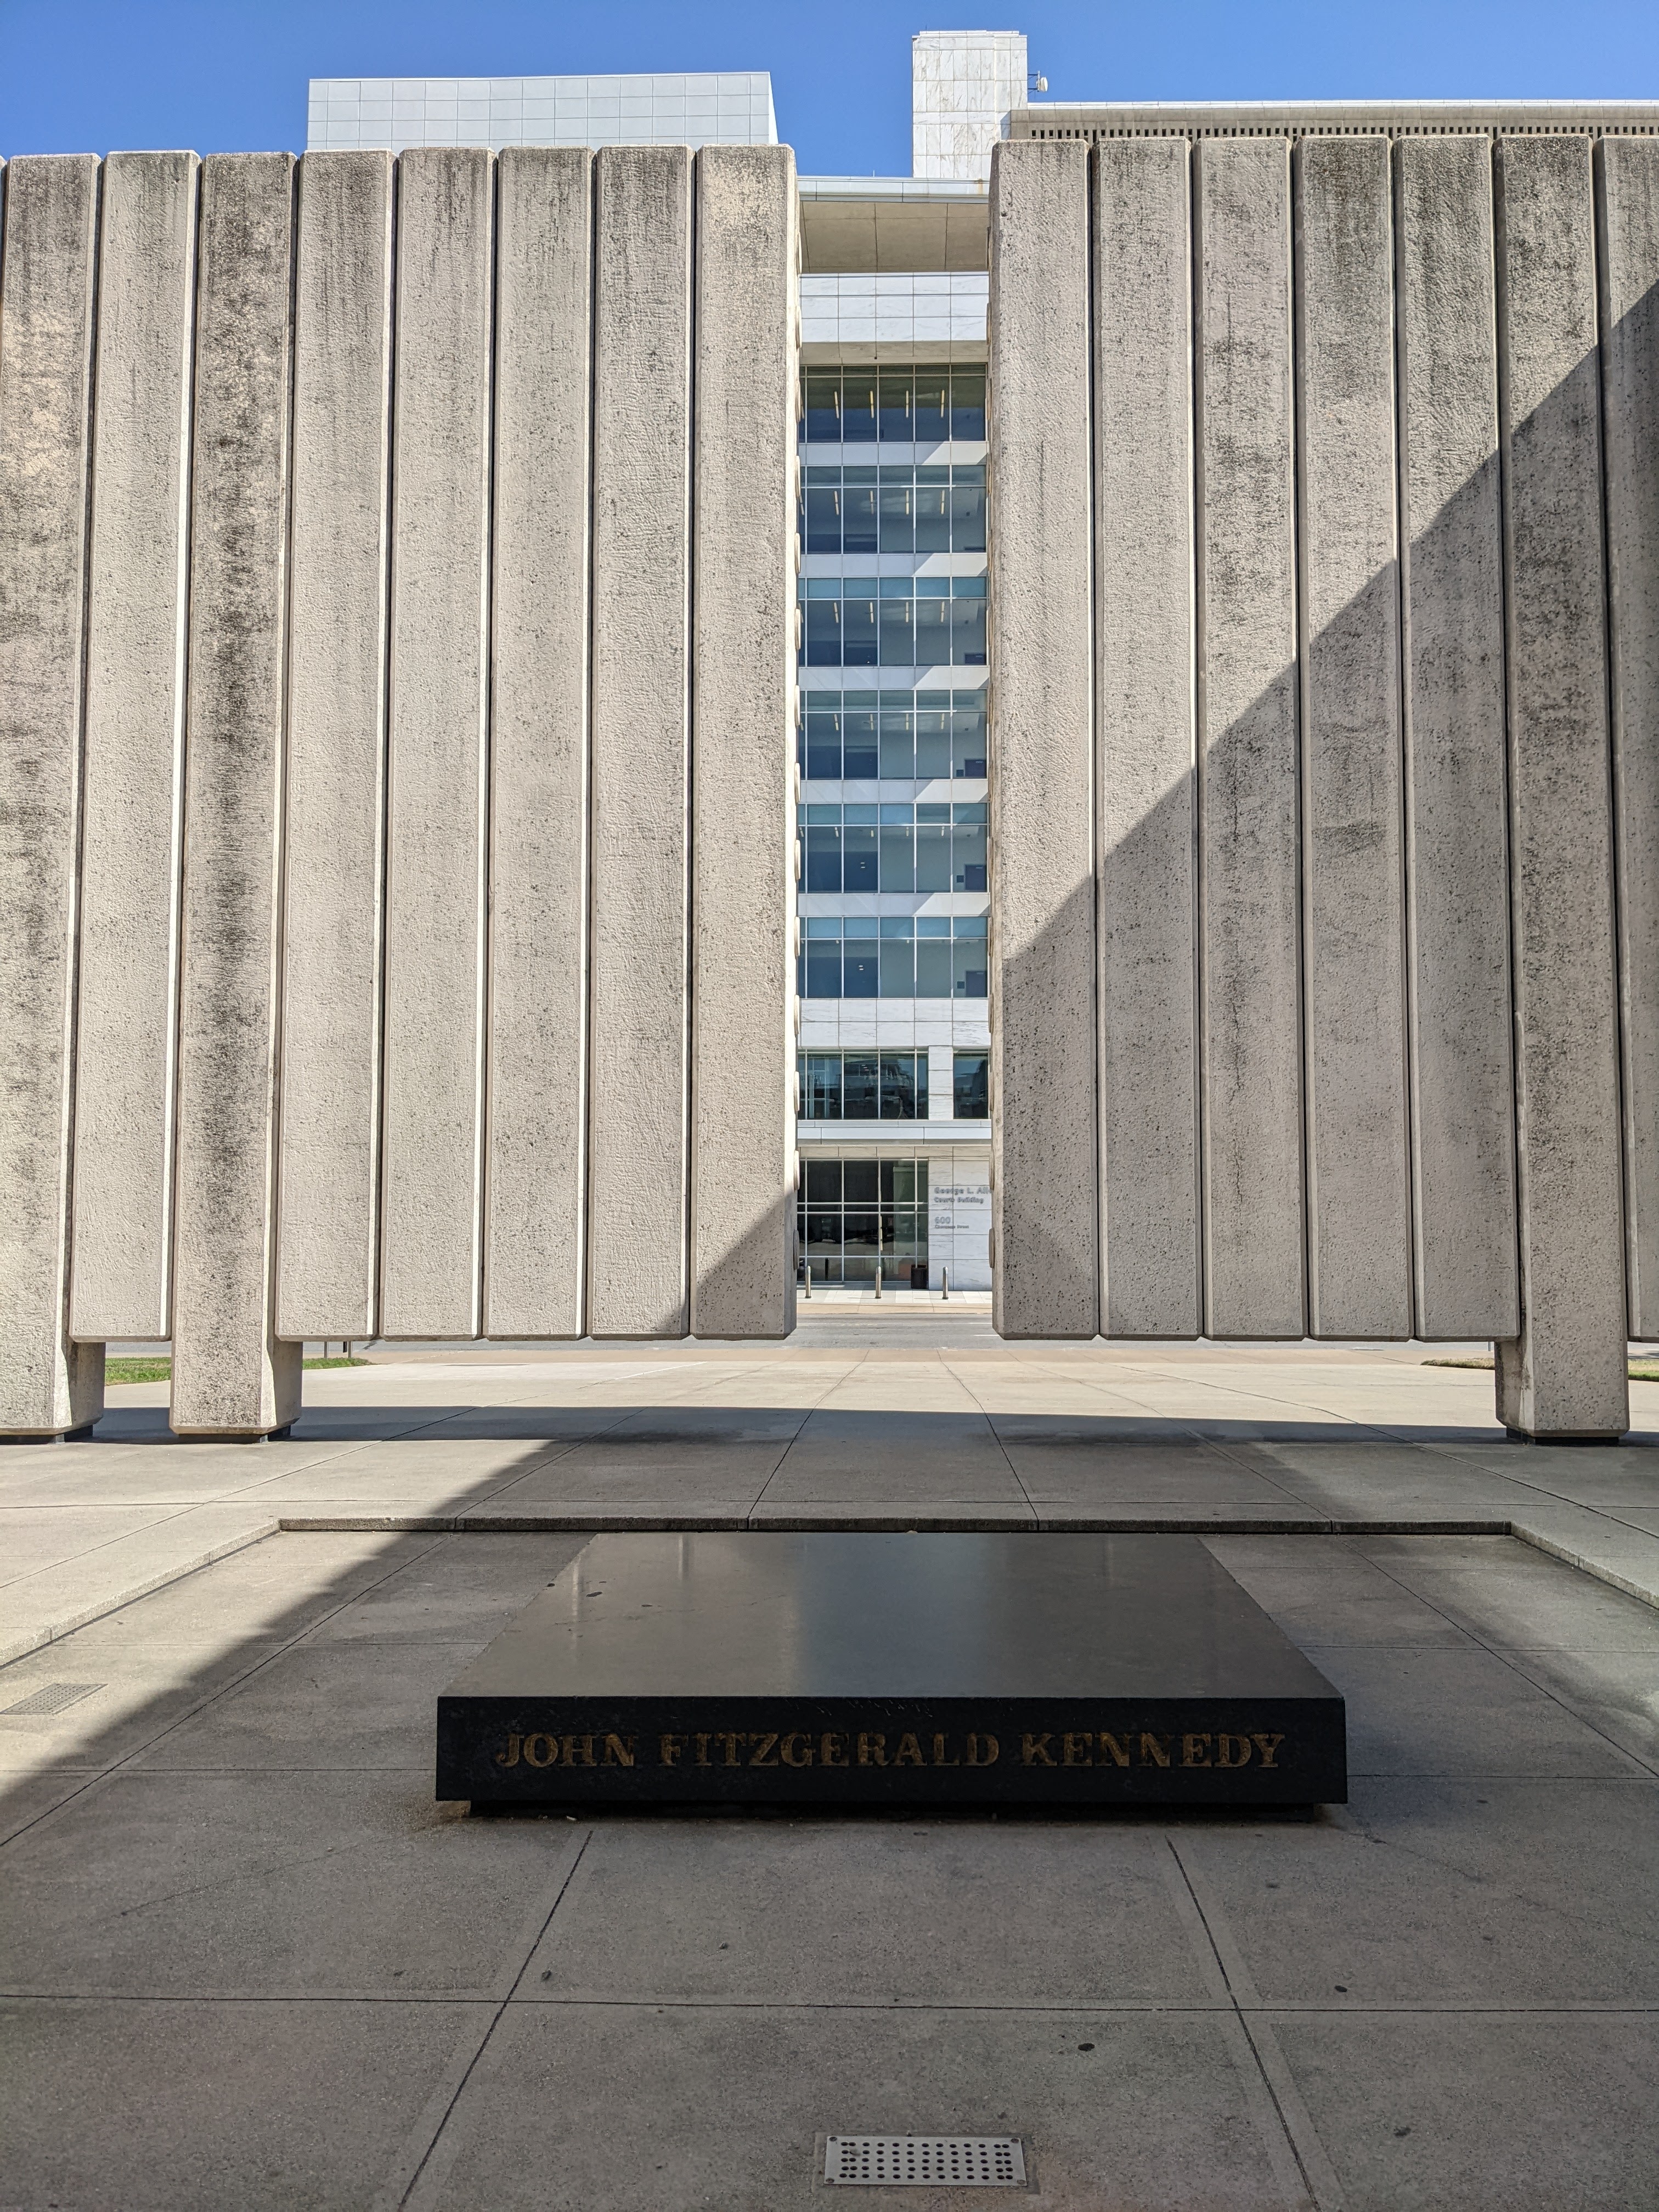 The sun slants into the imposing concrete walls that form the "open tomb" design of the JFK memorial